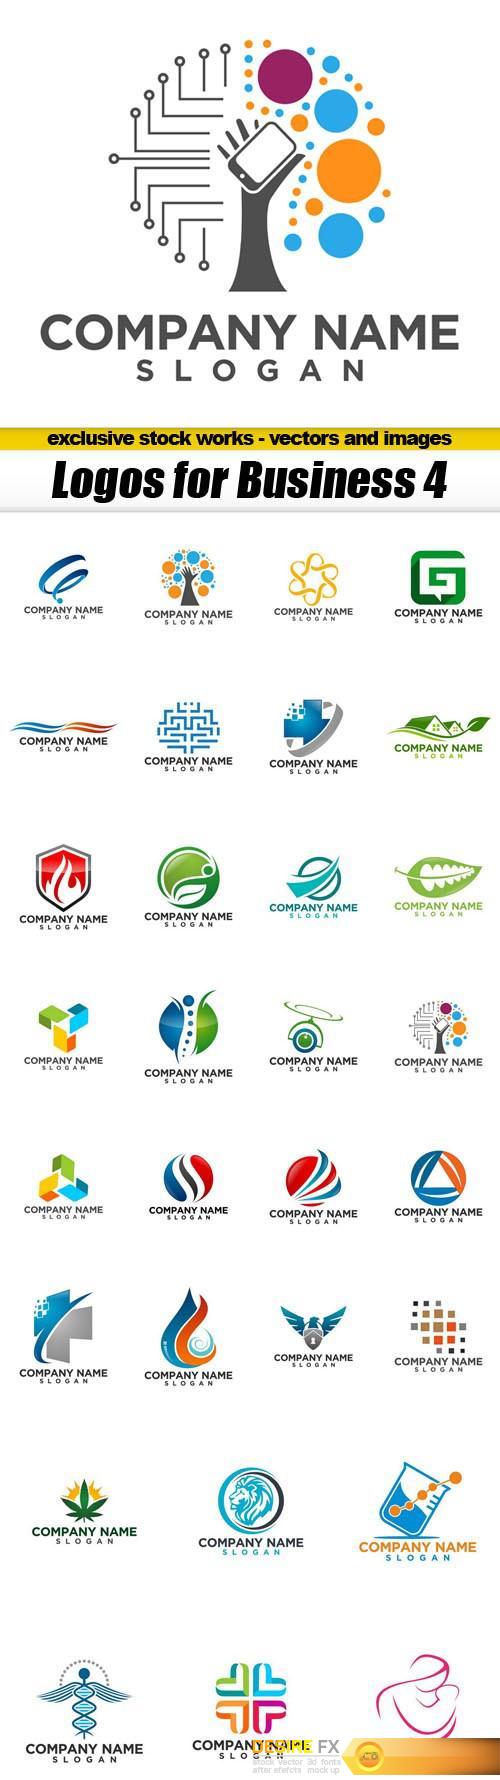 Logos for Business 4 